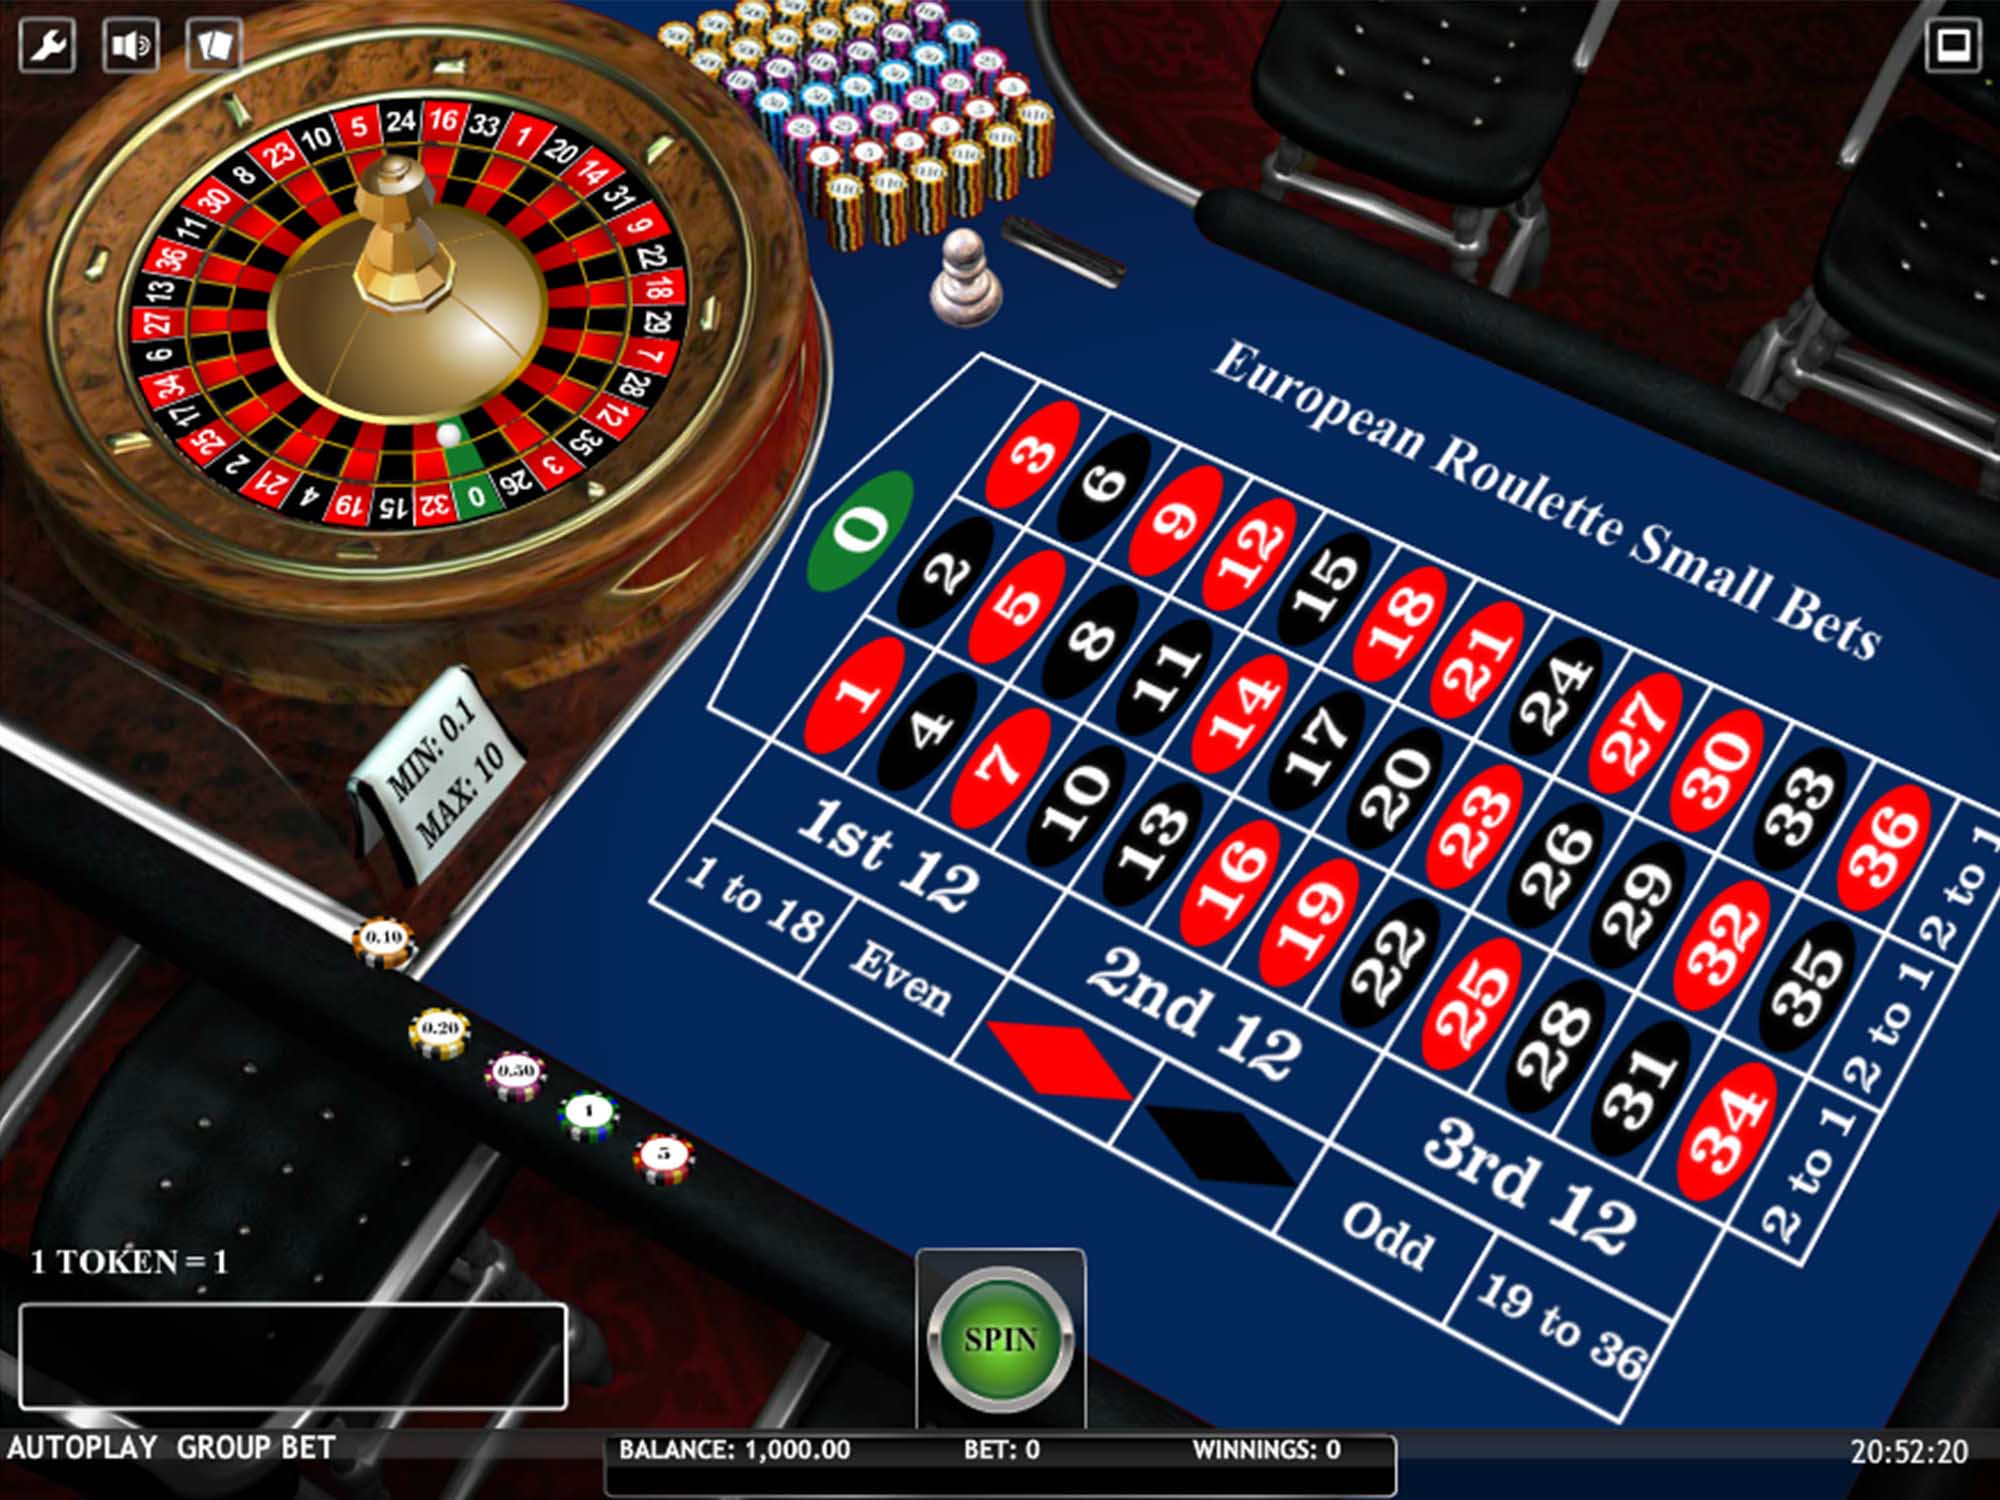 European roulette small bets